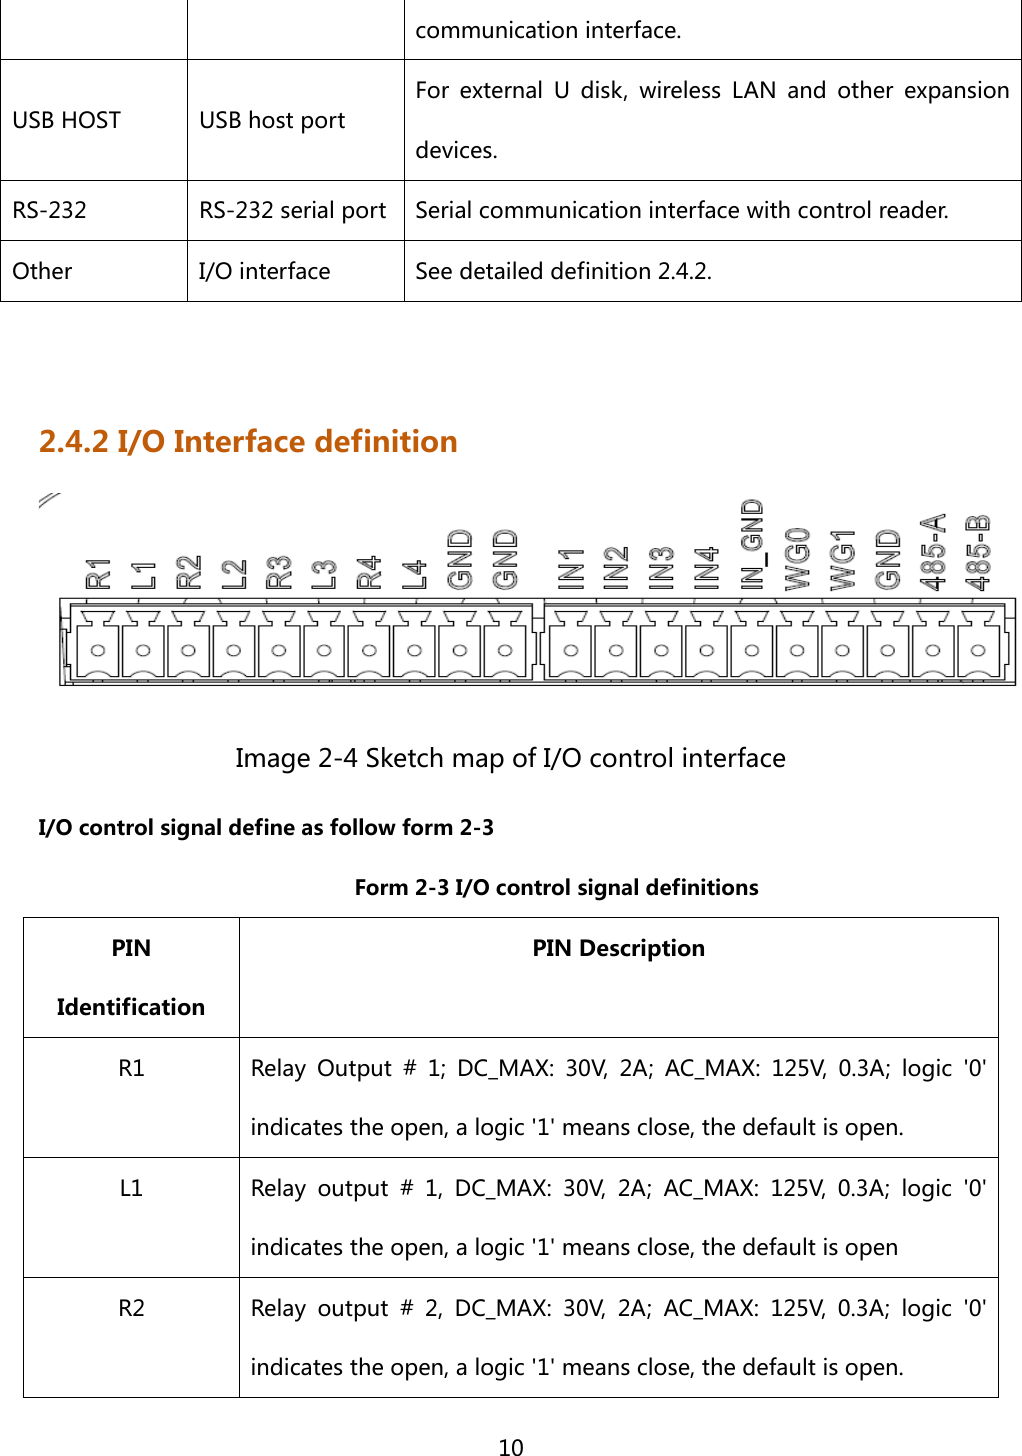  10  communication interface. USB HOST  USB host port For  external  U  disk,  wireless  LAN  and  other  expansion devices. RS-232  RS-232 serial port  Serial communication interface with control reader. Other  I/O interface  See detailed definition 2.4.2.  2.4.2 I/O Interface definition  Image 2-4 Sketch map of I/O control interface I/O control signal define as follow form 2-3                                 Form 2-3 I/O control signal definitions PIN Identification PIN Description R1  Relay  Output  #  1;  DC_MAX:  30V,  2A;  AC_MAX:  125V,  0.3A;  logic &apos;0&apos; indicates the open, a logic &apos;1&apos; means close, the default is open. L1  Relay  output  #  1,  DC_MAX:  30V,  2A;  AC_MAX:  125V,  0.3A;  logic &apos;0&apos; indicates the open, a logic &apos;1&apos; means close, the default is open R2  Relay  output  #  2,  DC_MAX:  30V,  2A;  AC_MAX:  125V,  0.3A;  logic &apos;0&apos; indicates the open, a logic &apos;1&apos; means close, the default is open. 